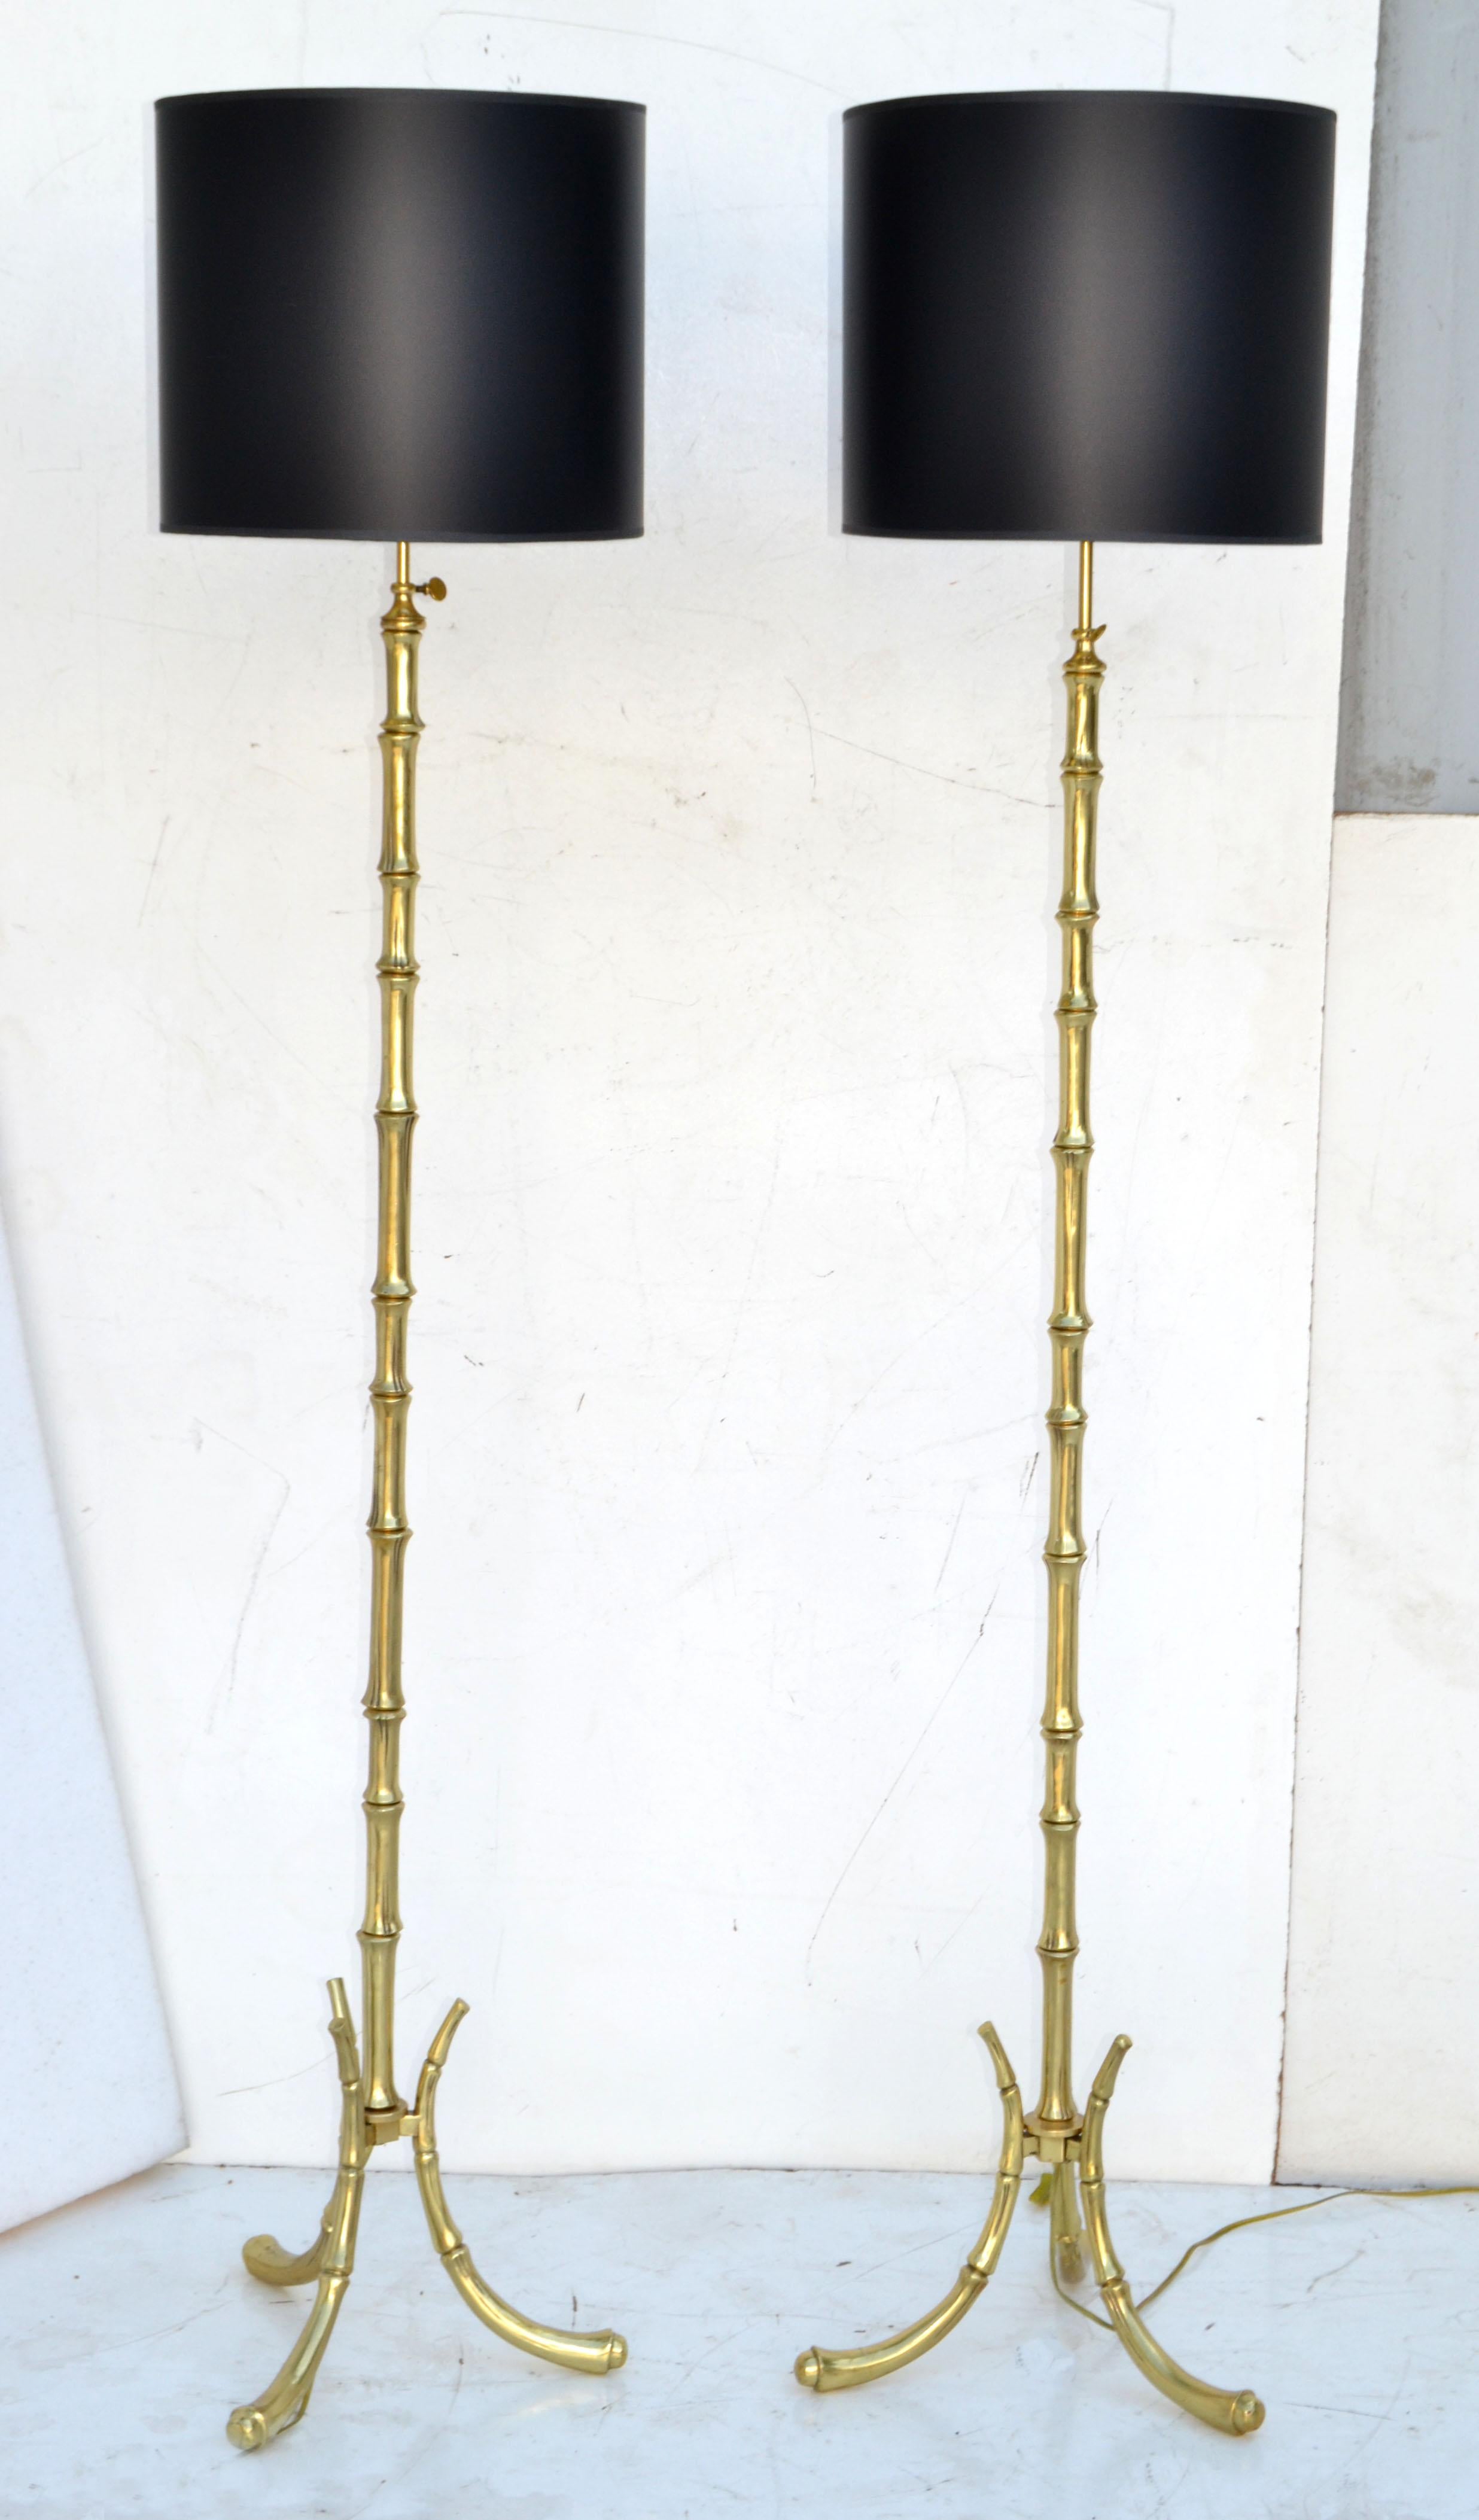 Fantastic pair of Maison Baguès floor lamps in solid bronze Faux Bamboo very heavy, high quality floor lamp 
French Mid-Century Modern Lamps made in the 1950.
US rewired, working condition each Lamp takes one socket 100 watts max. or LED